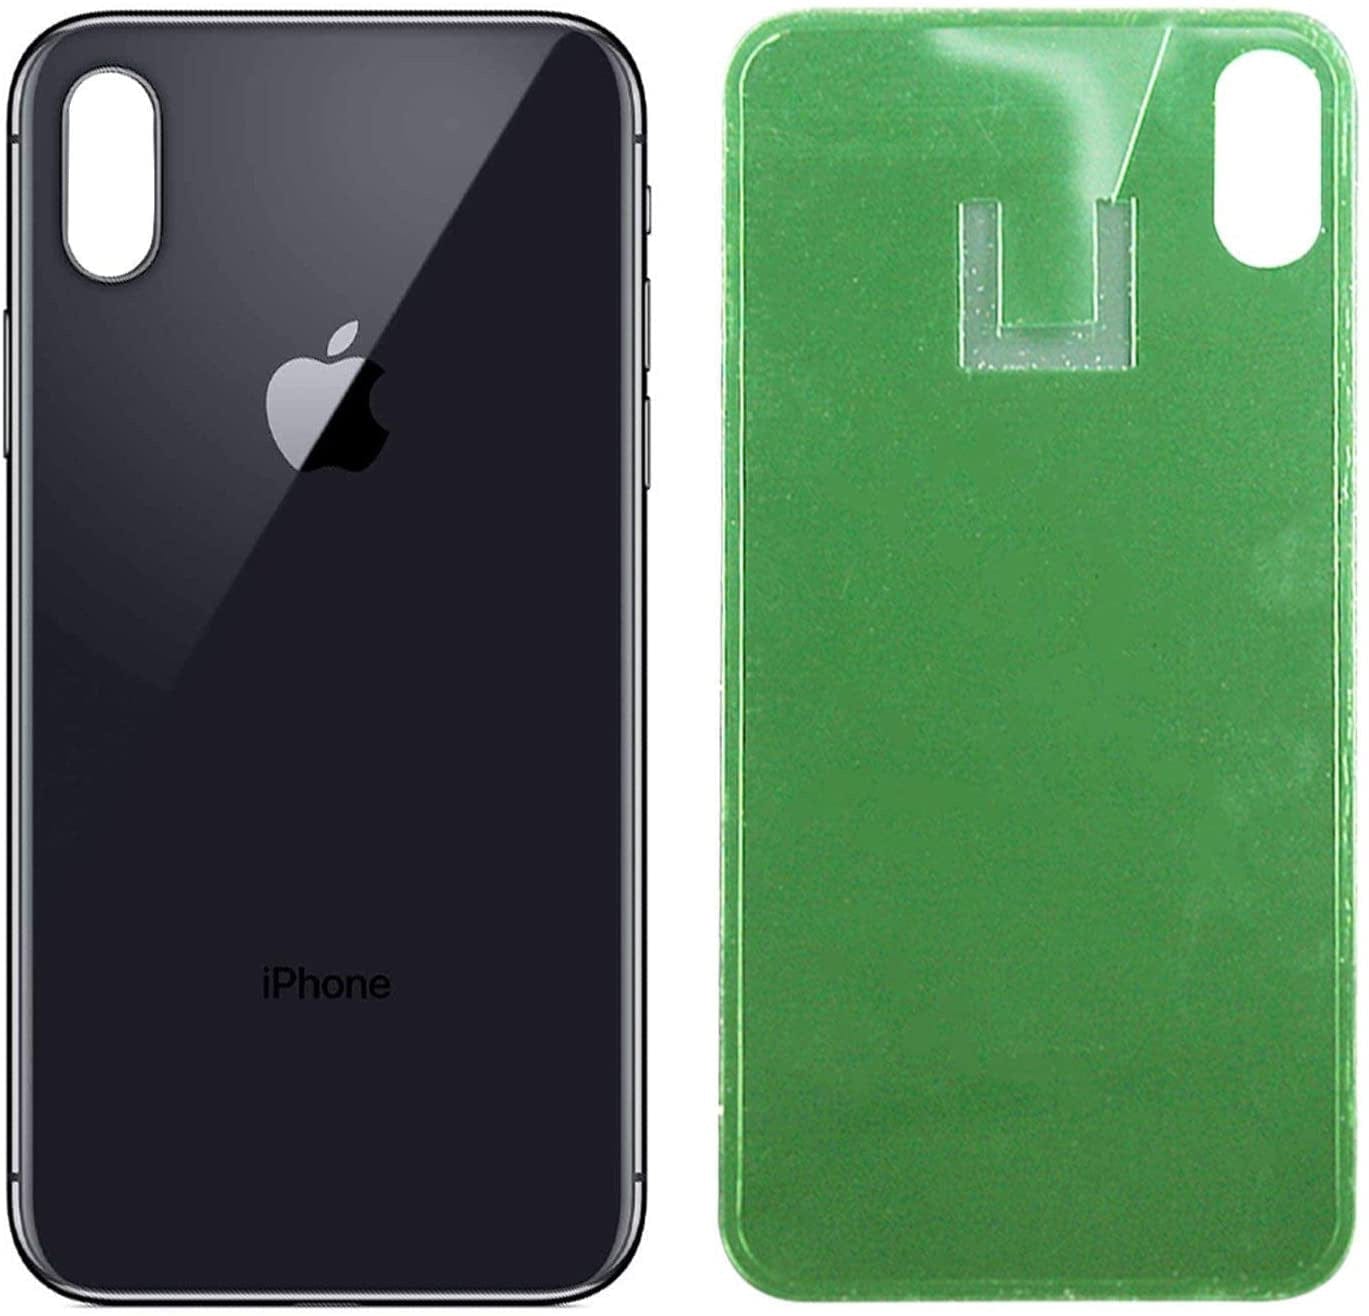 iPhone XS Back Glass Replacement Black Color